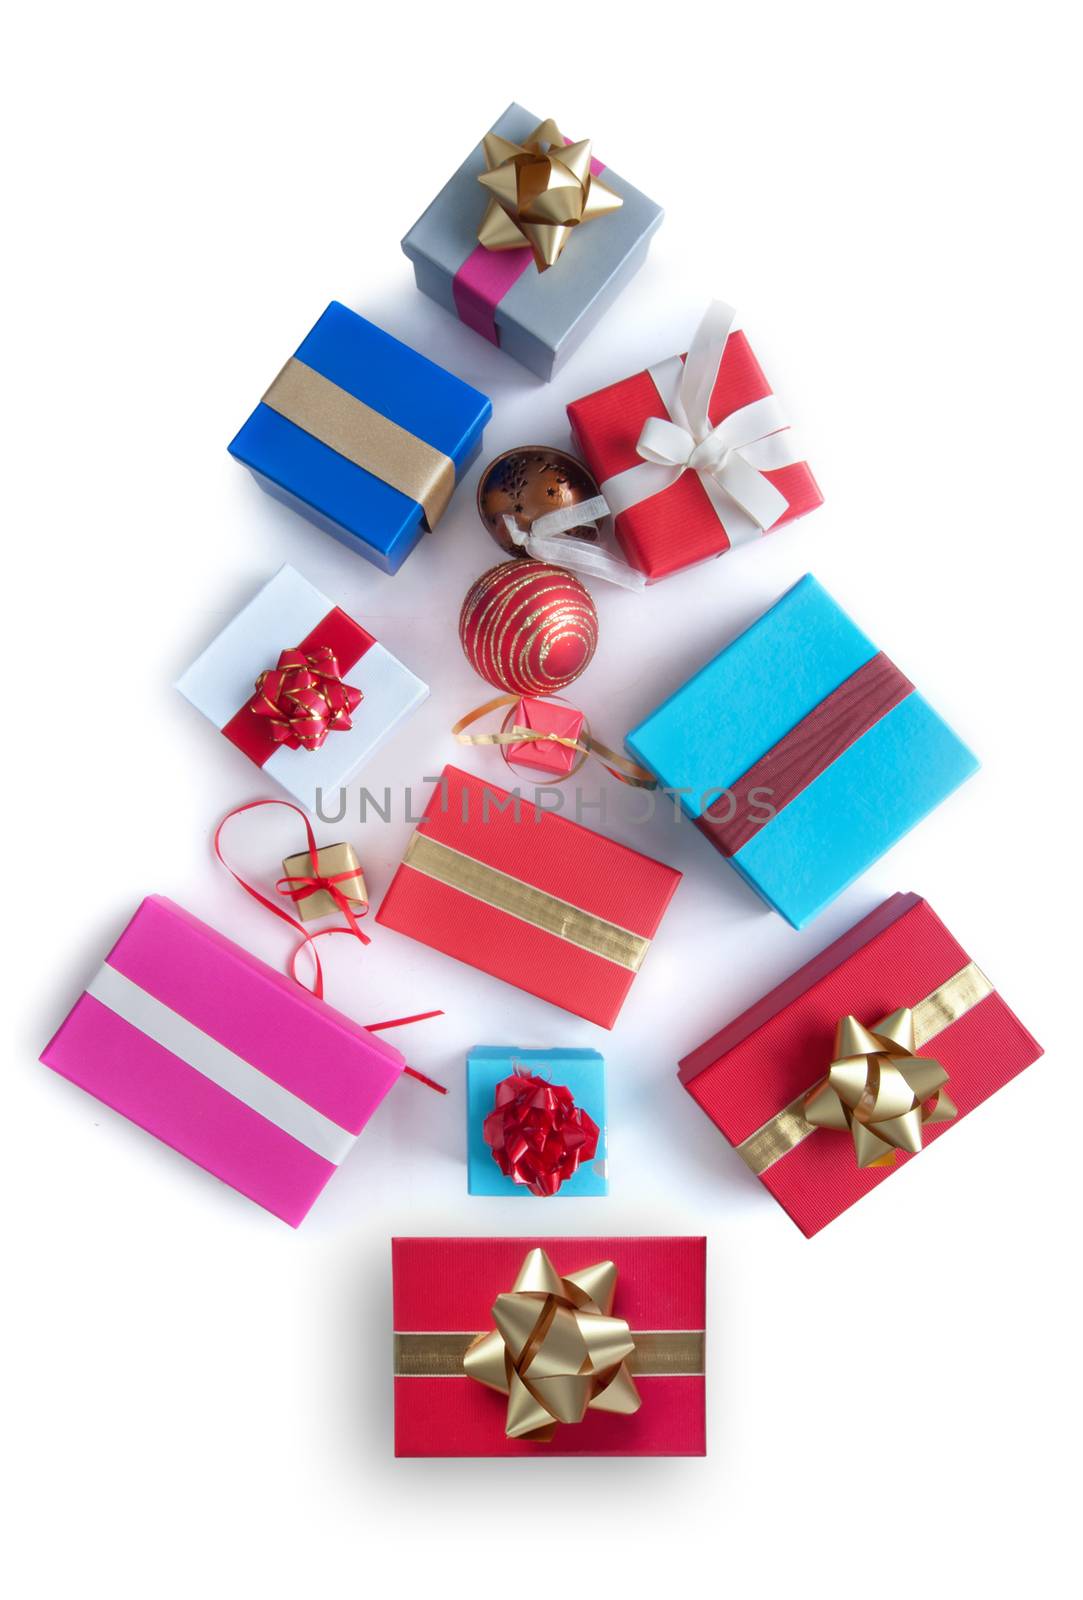 Gifts in the shape of a christmas tree by unikpix